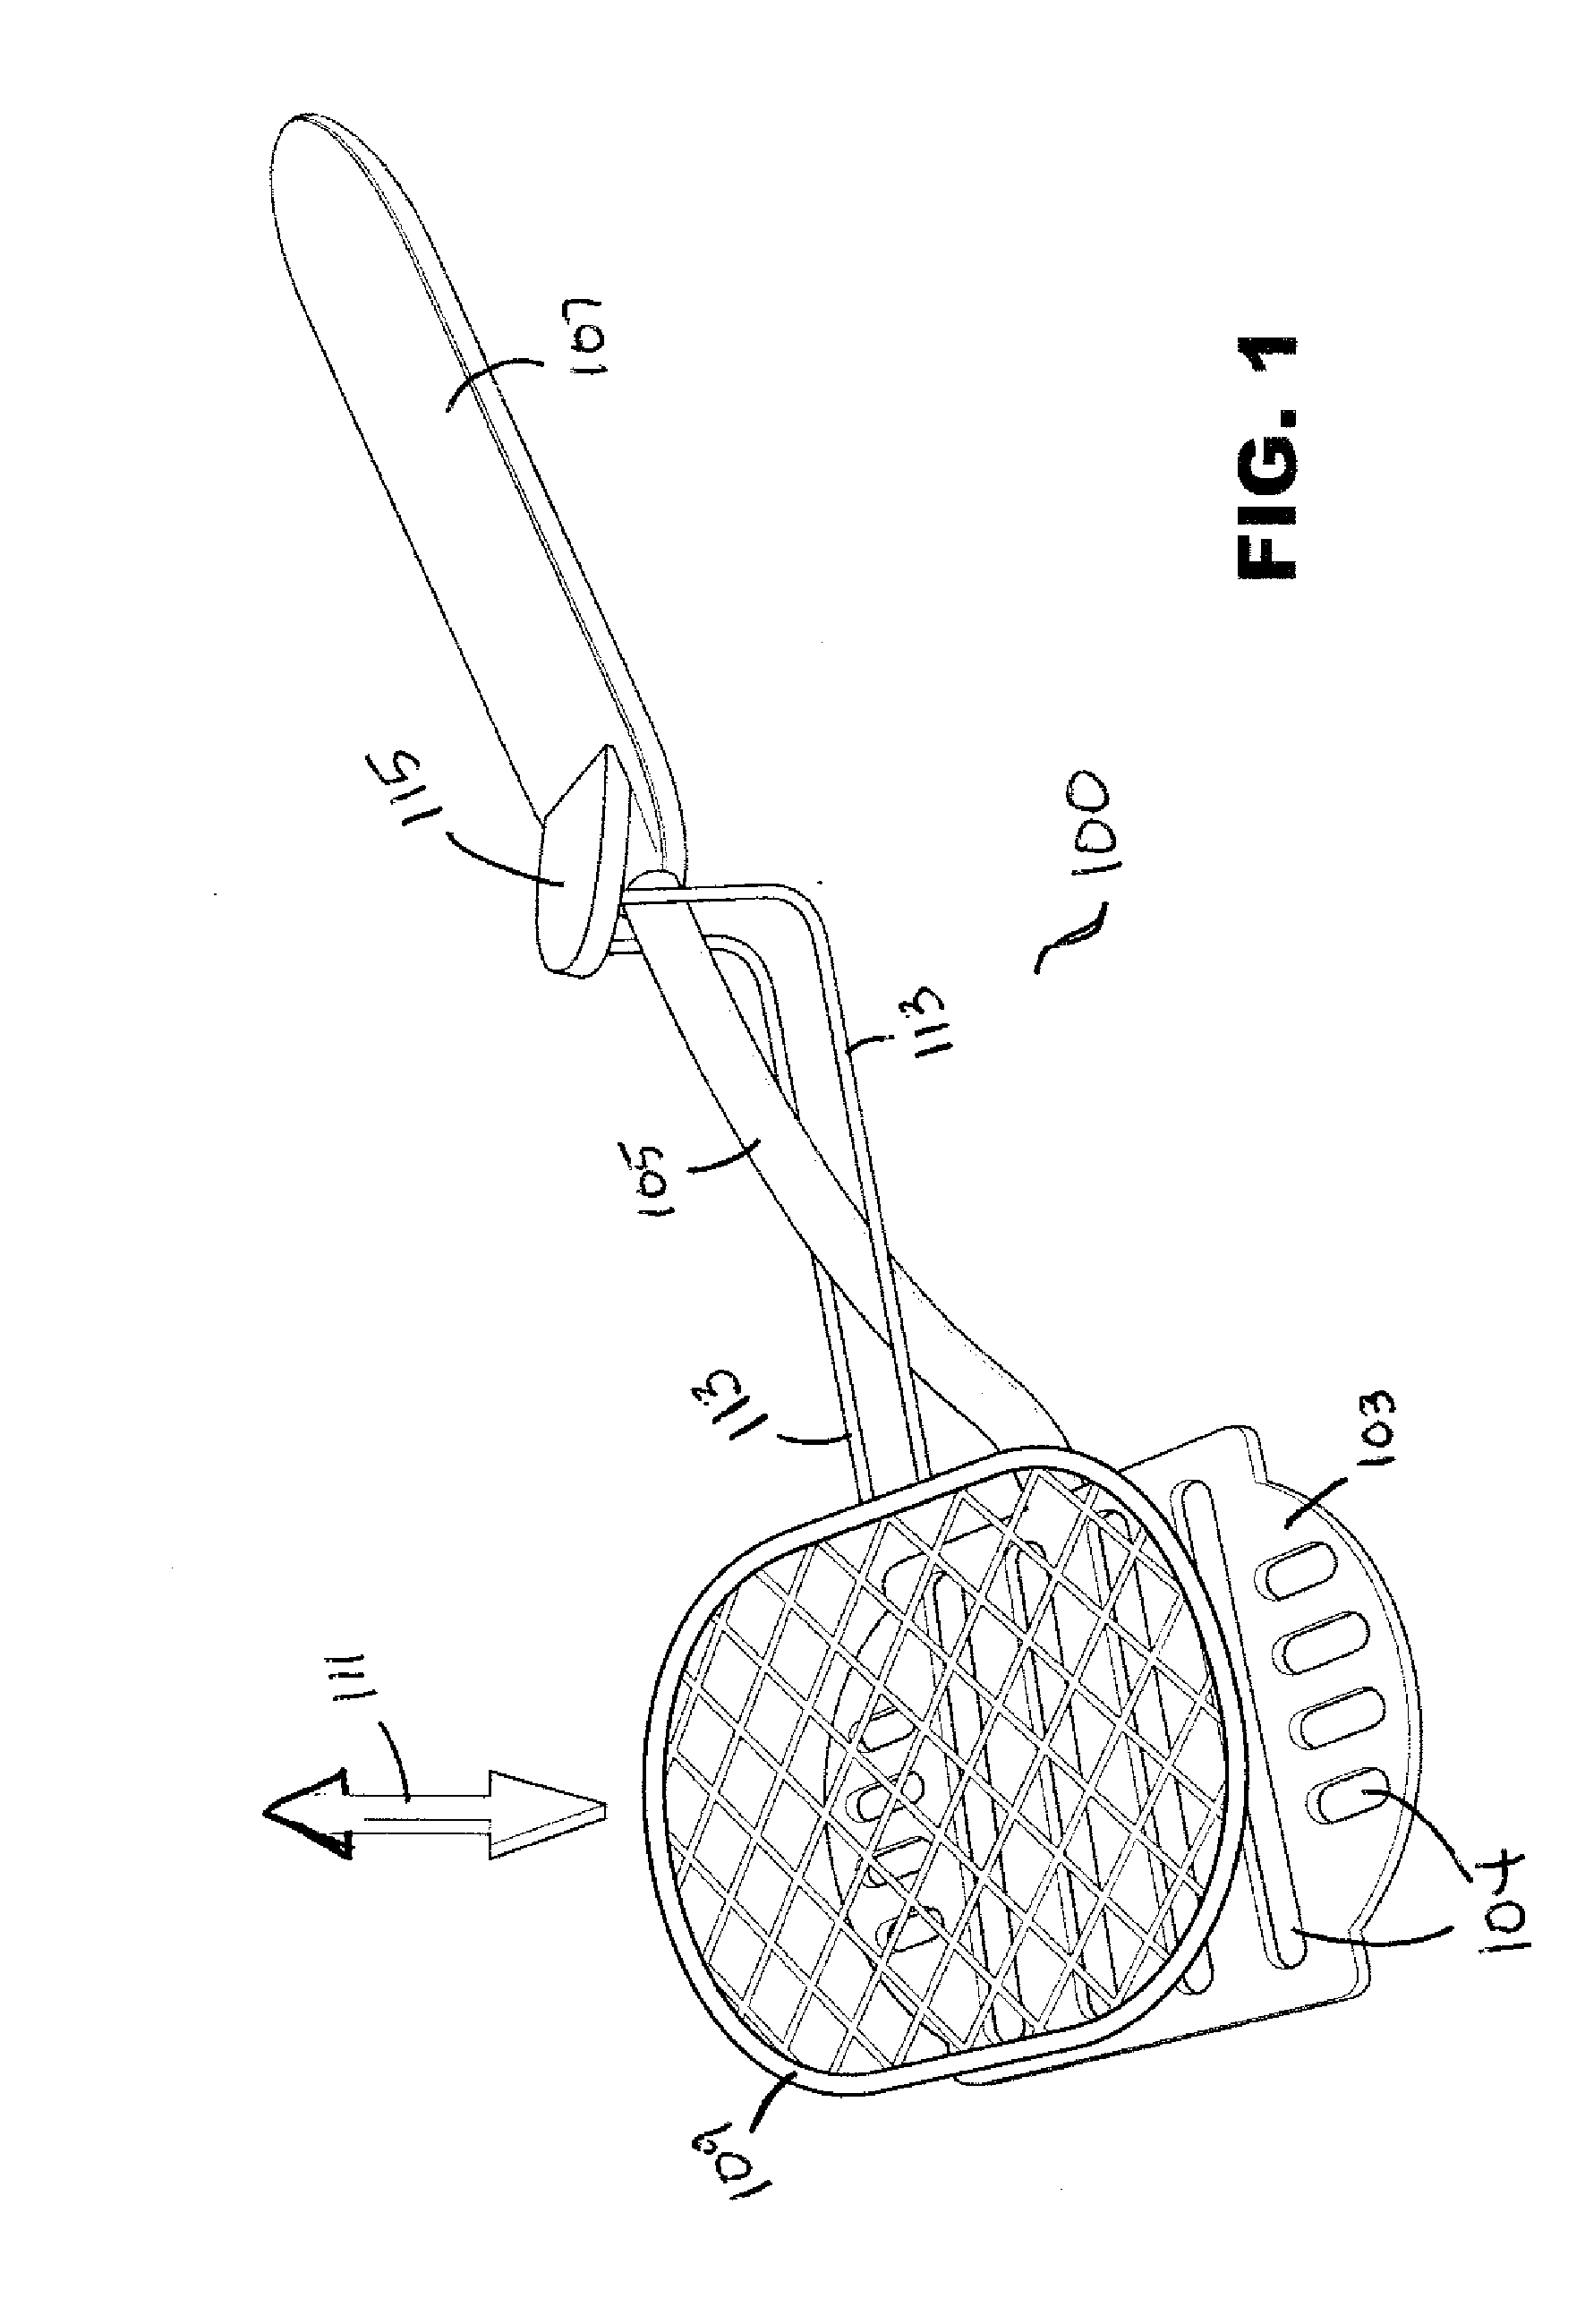 Apparatus for Draining Excess Fluids from Food